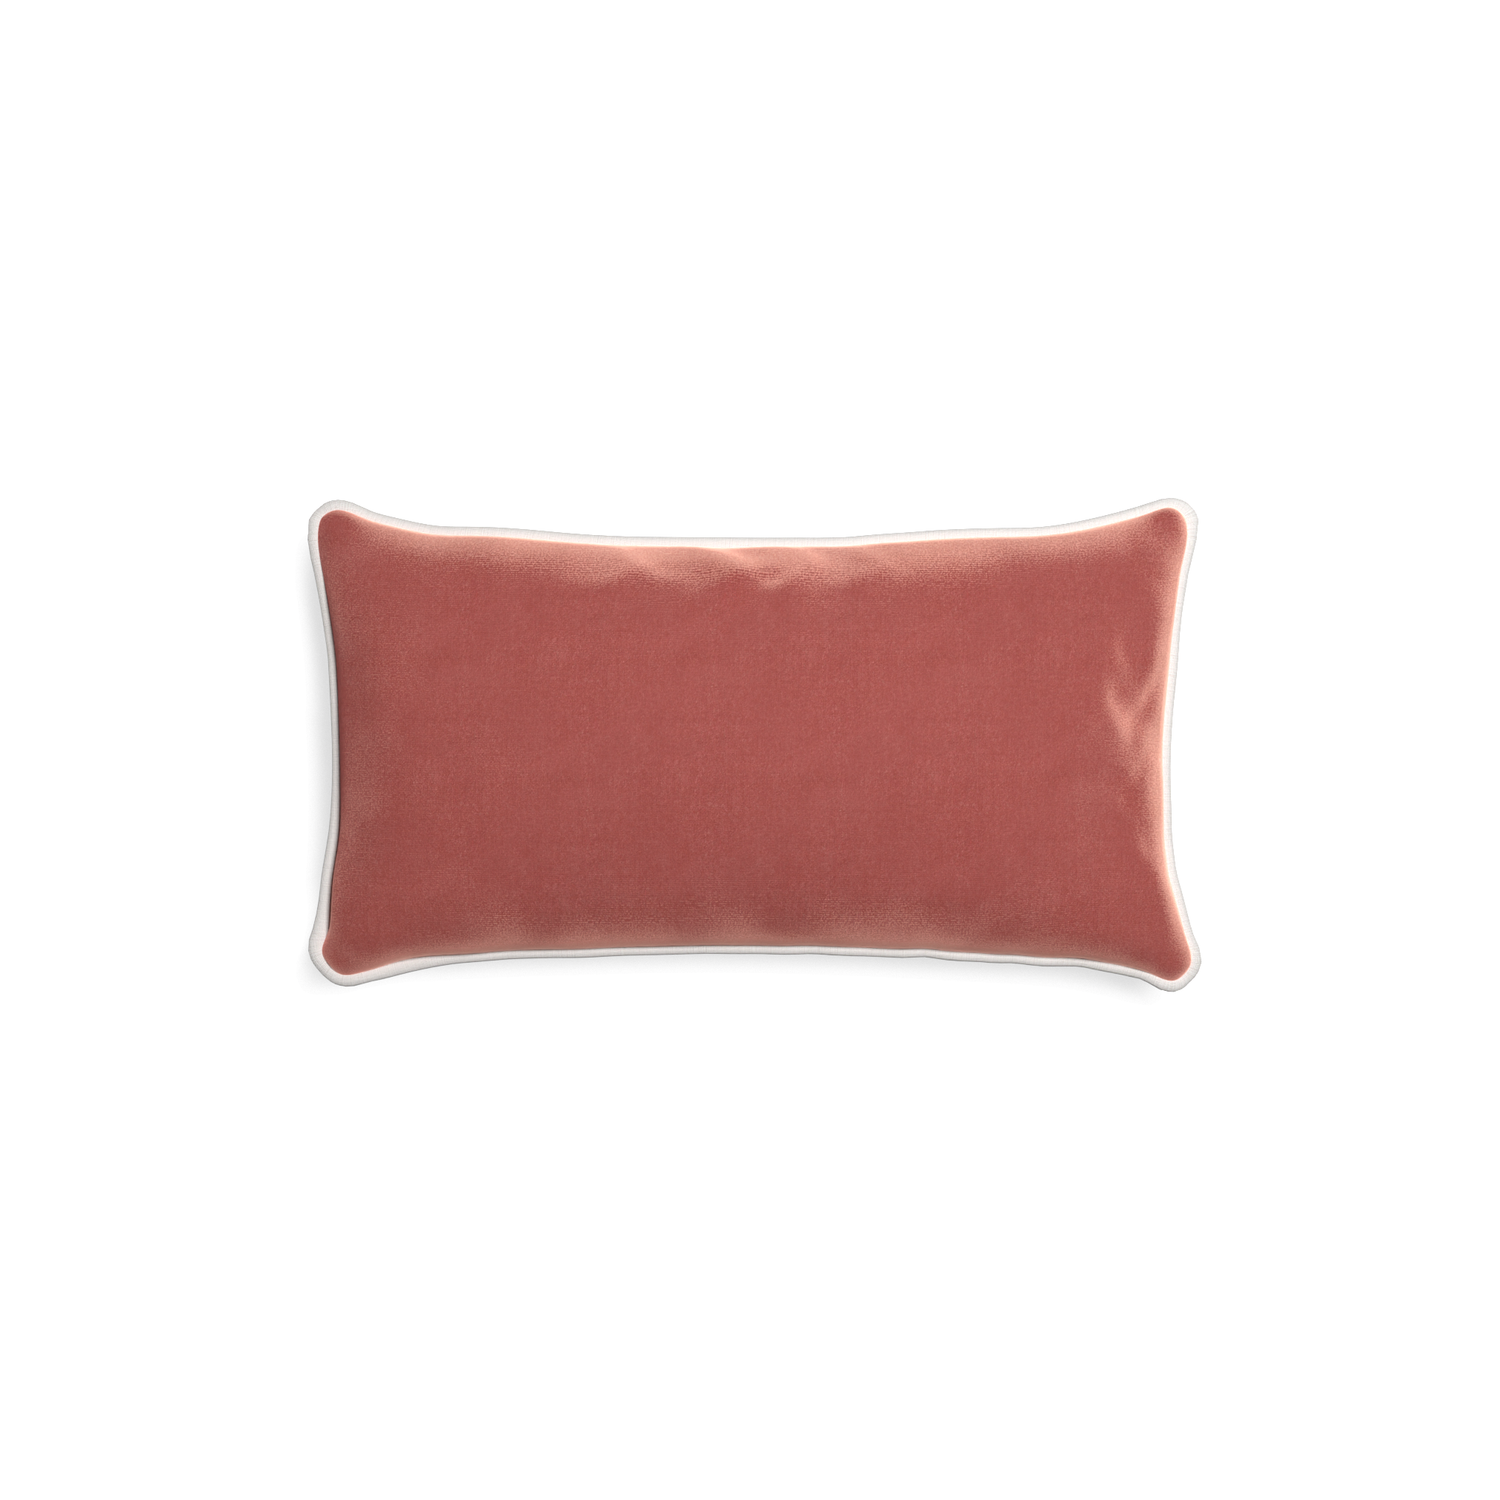 rectangle coral velvet pillow with white piping